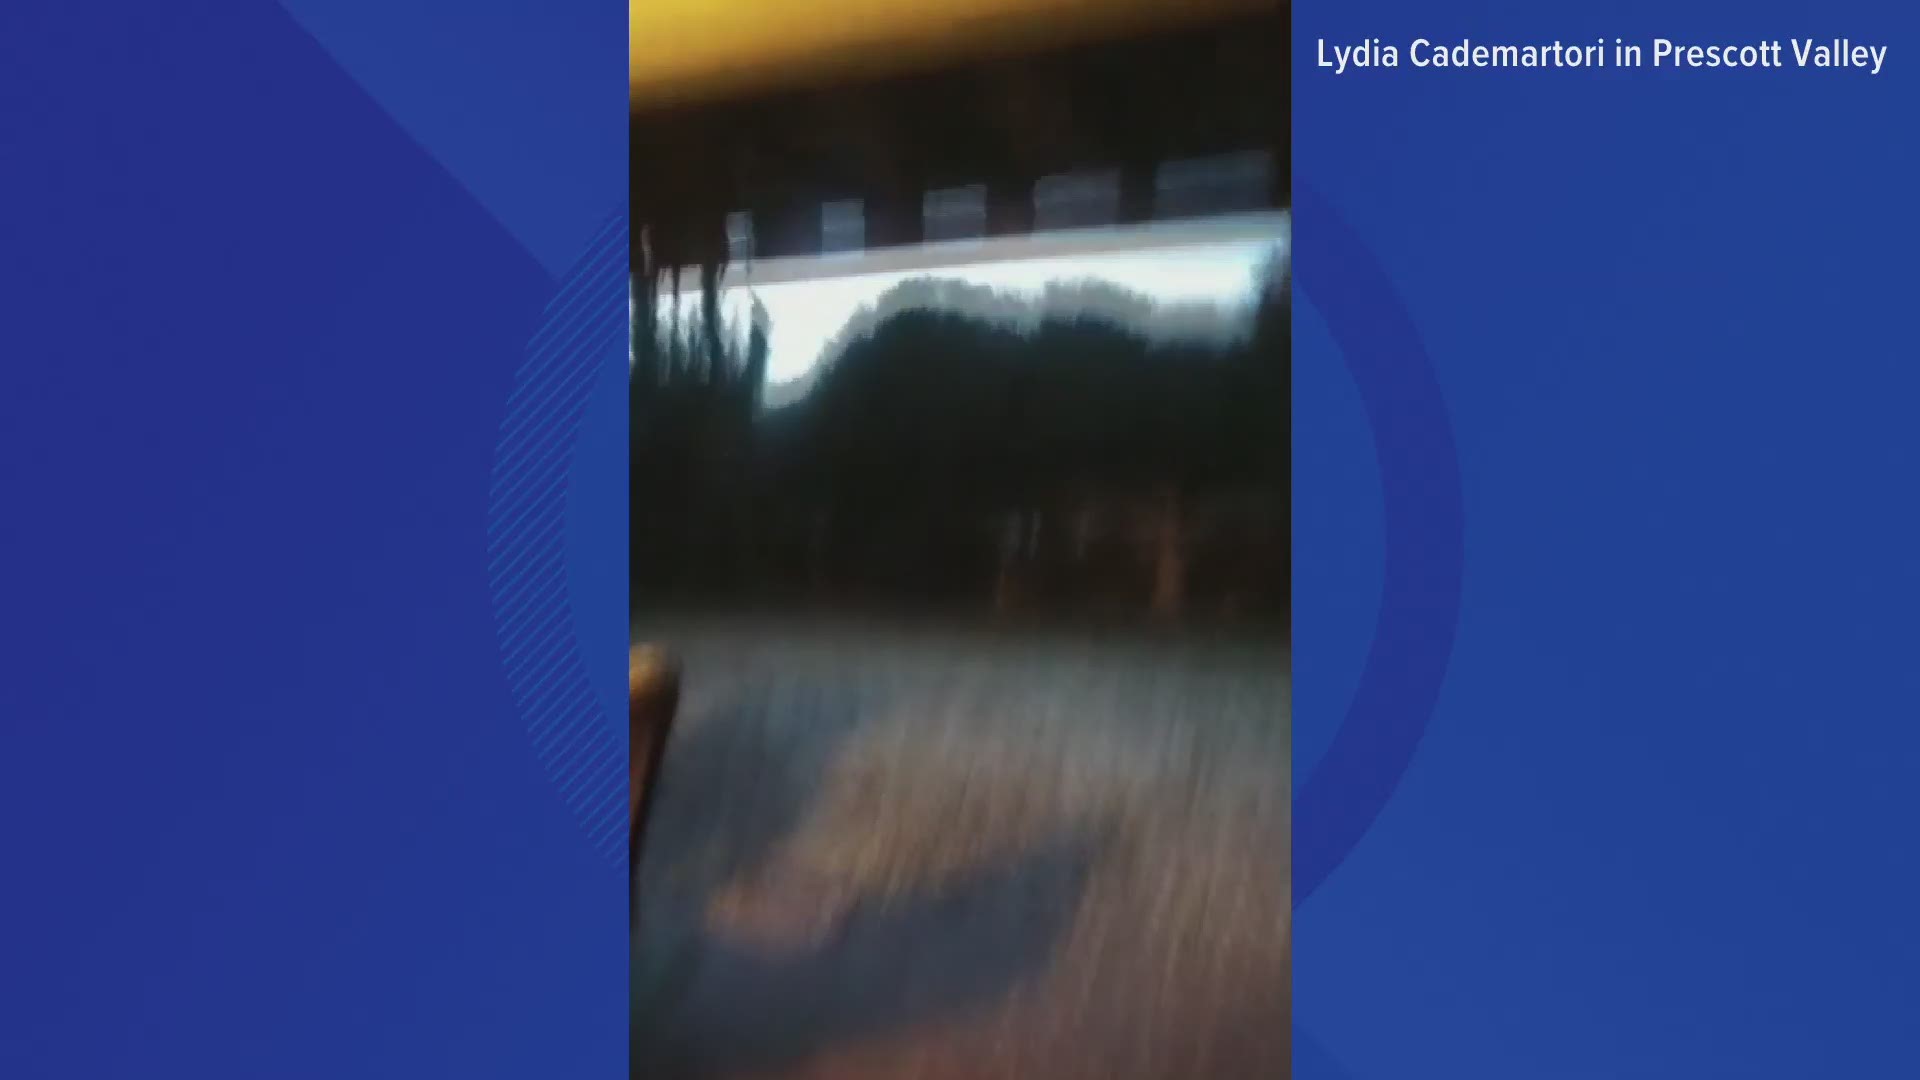 Lydia Cademartori captured video of hail falling in Prescott Valley. Storms passed through the area on the morning of Nov. 6, 2019.